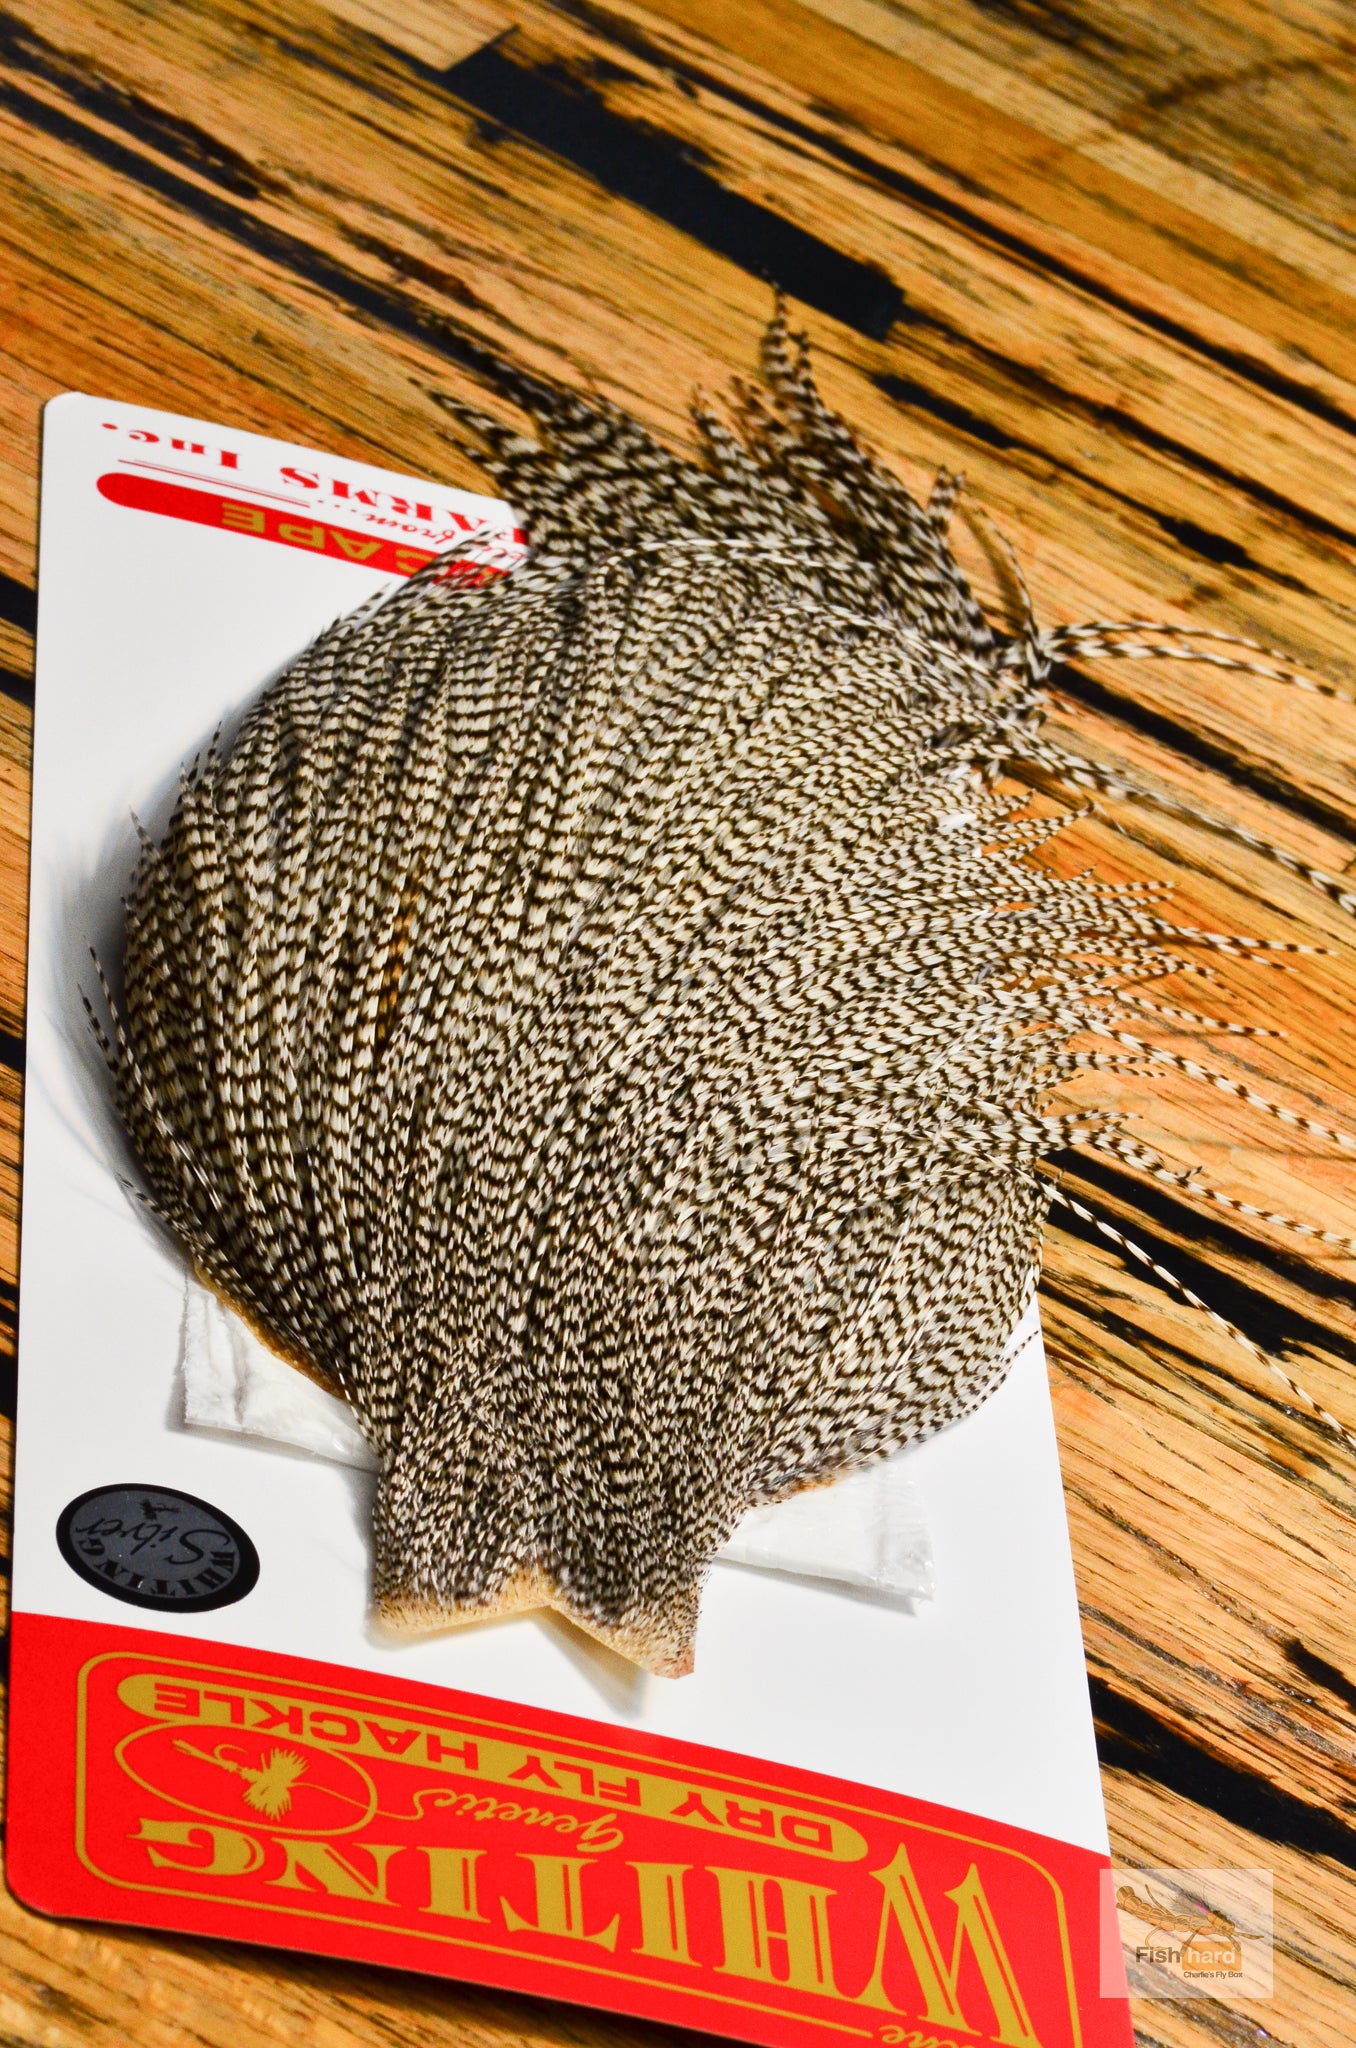 Whiting Dry Fly Hackle, Whiting Capes & Saddles